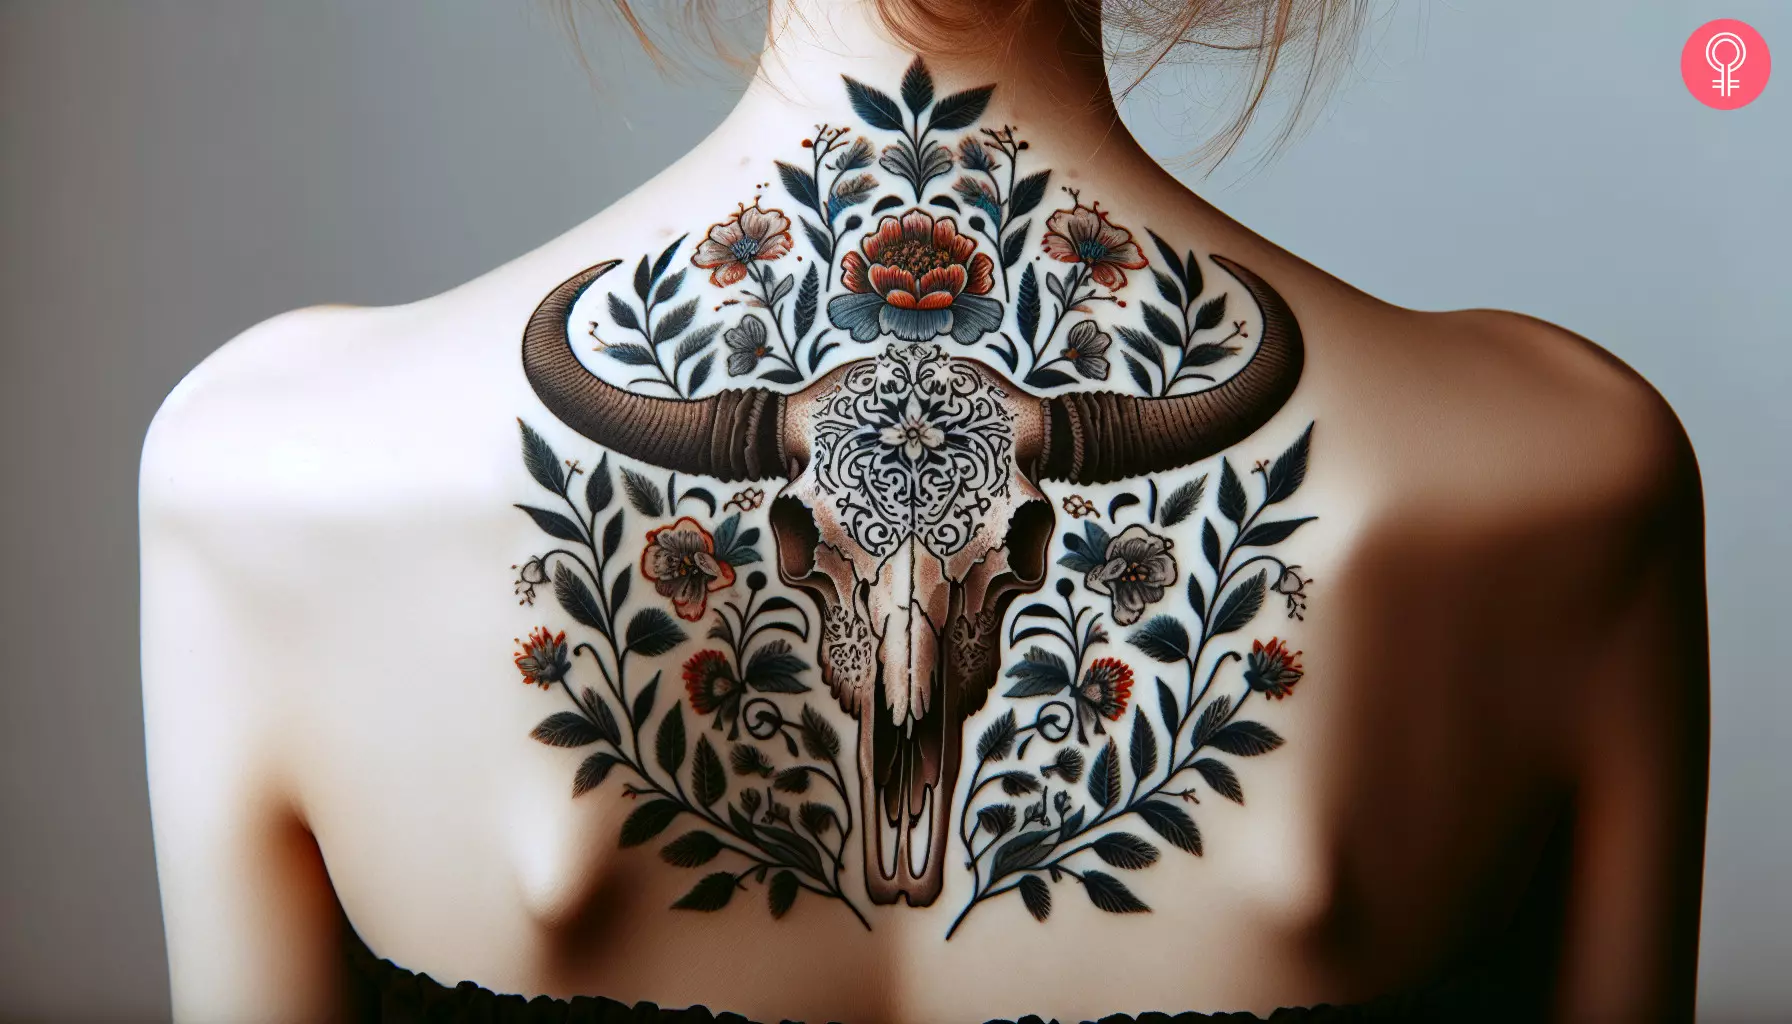 Woman with girly cow skull tattoo on the upper back